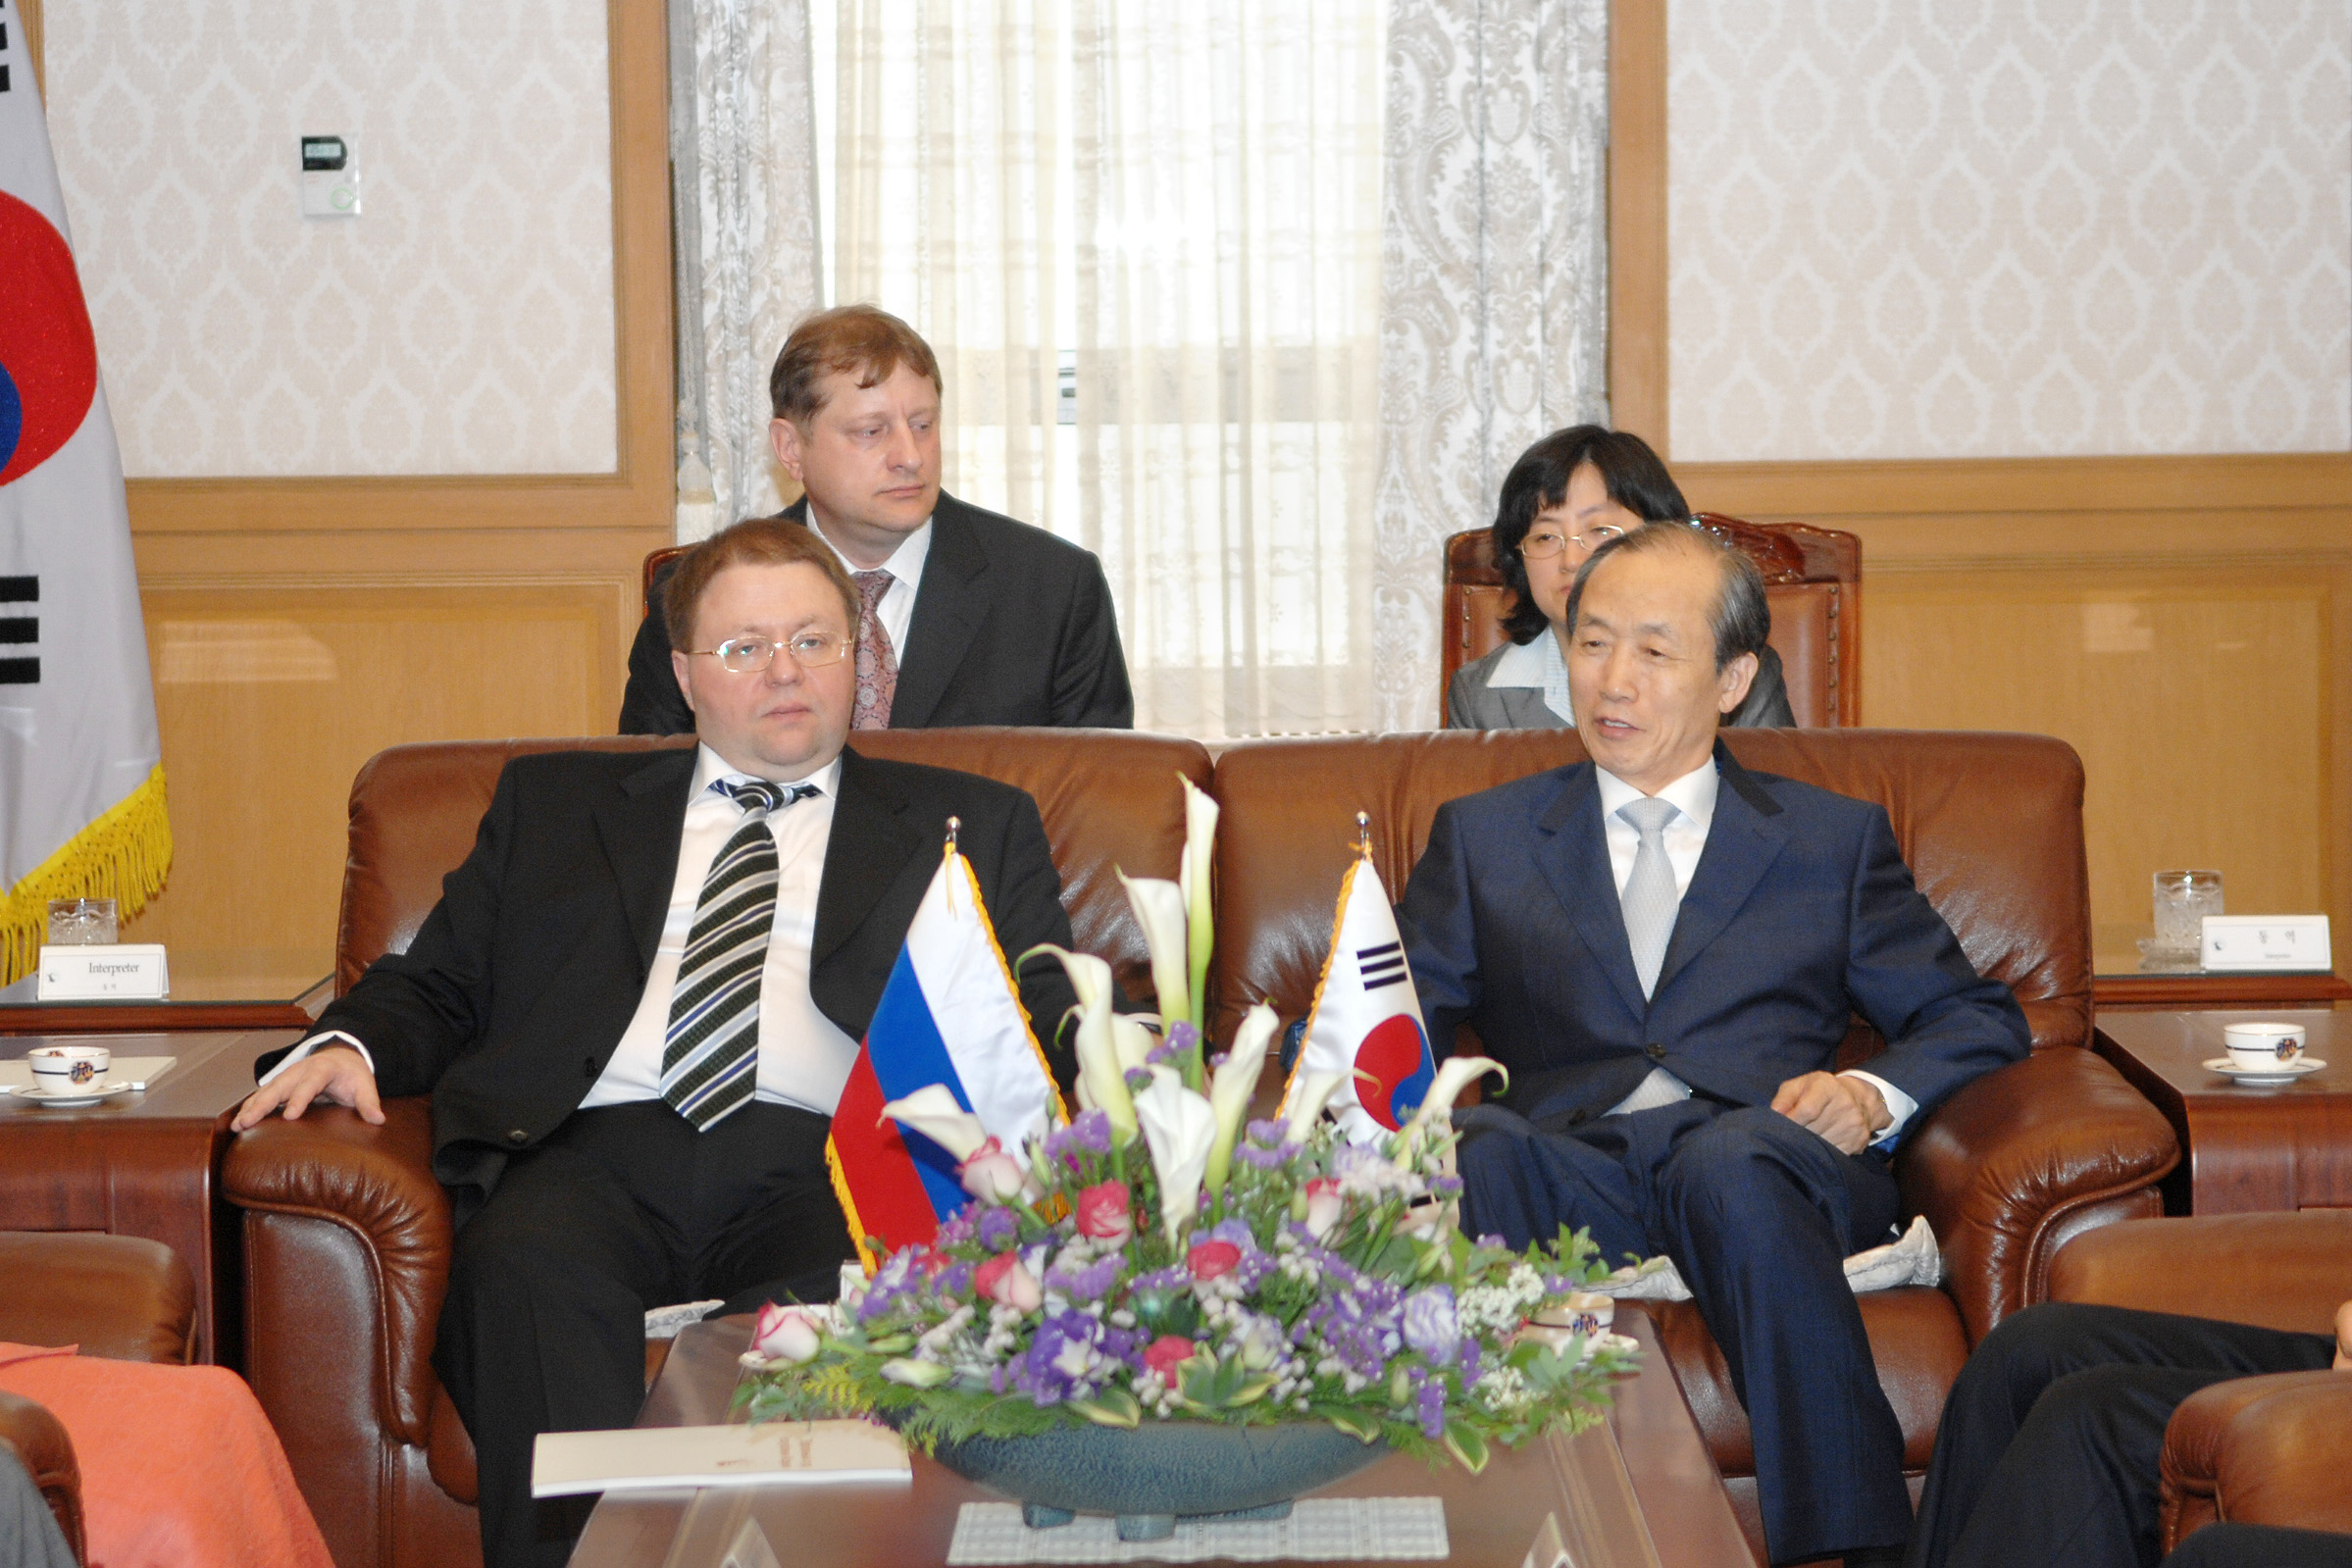 [05_10_09]Chief Justice of the Supreme Commercial Court of the Russian Federation visits the Supreme Court of Korea